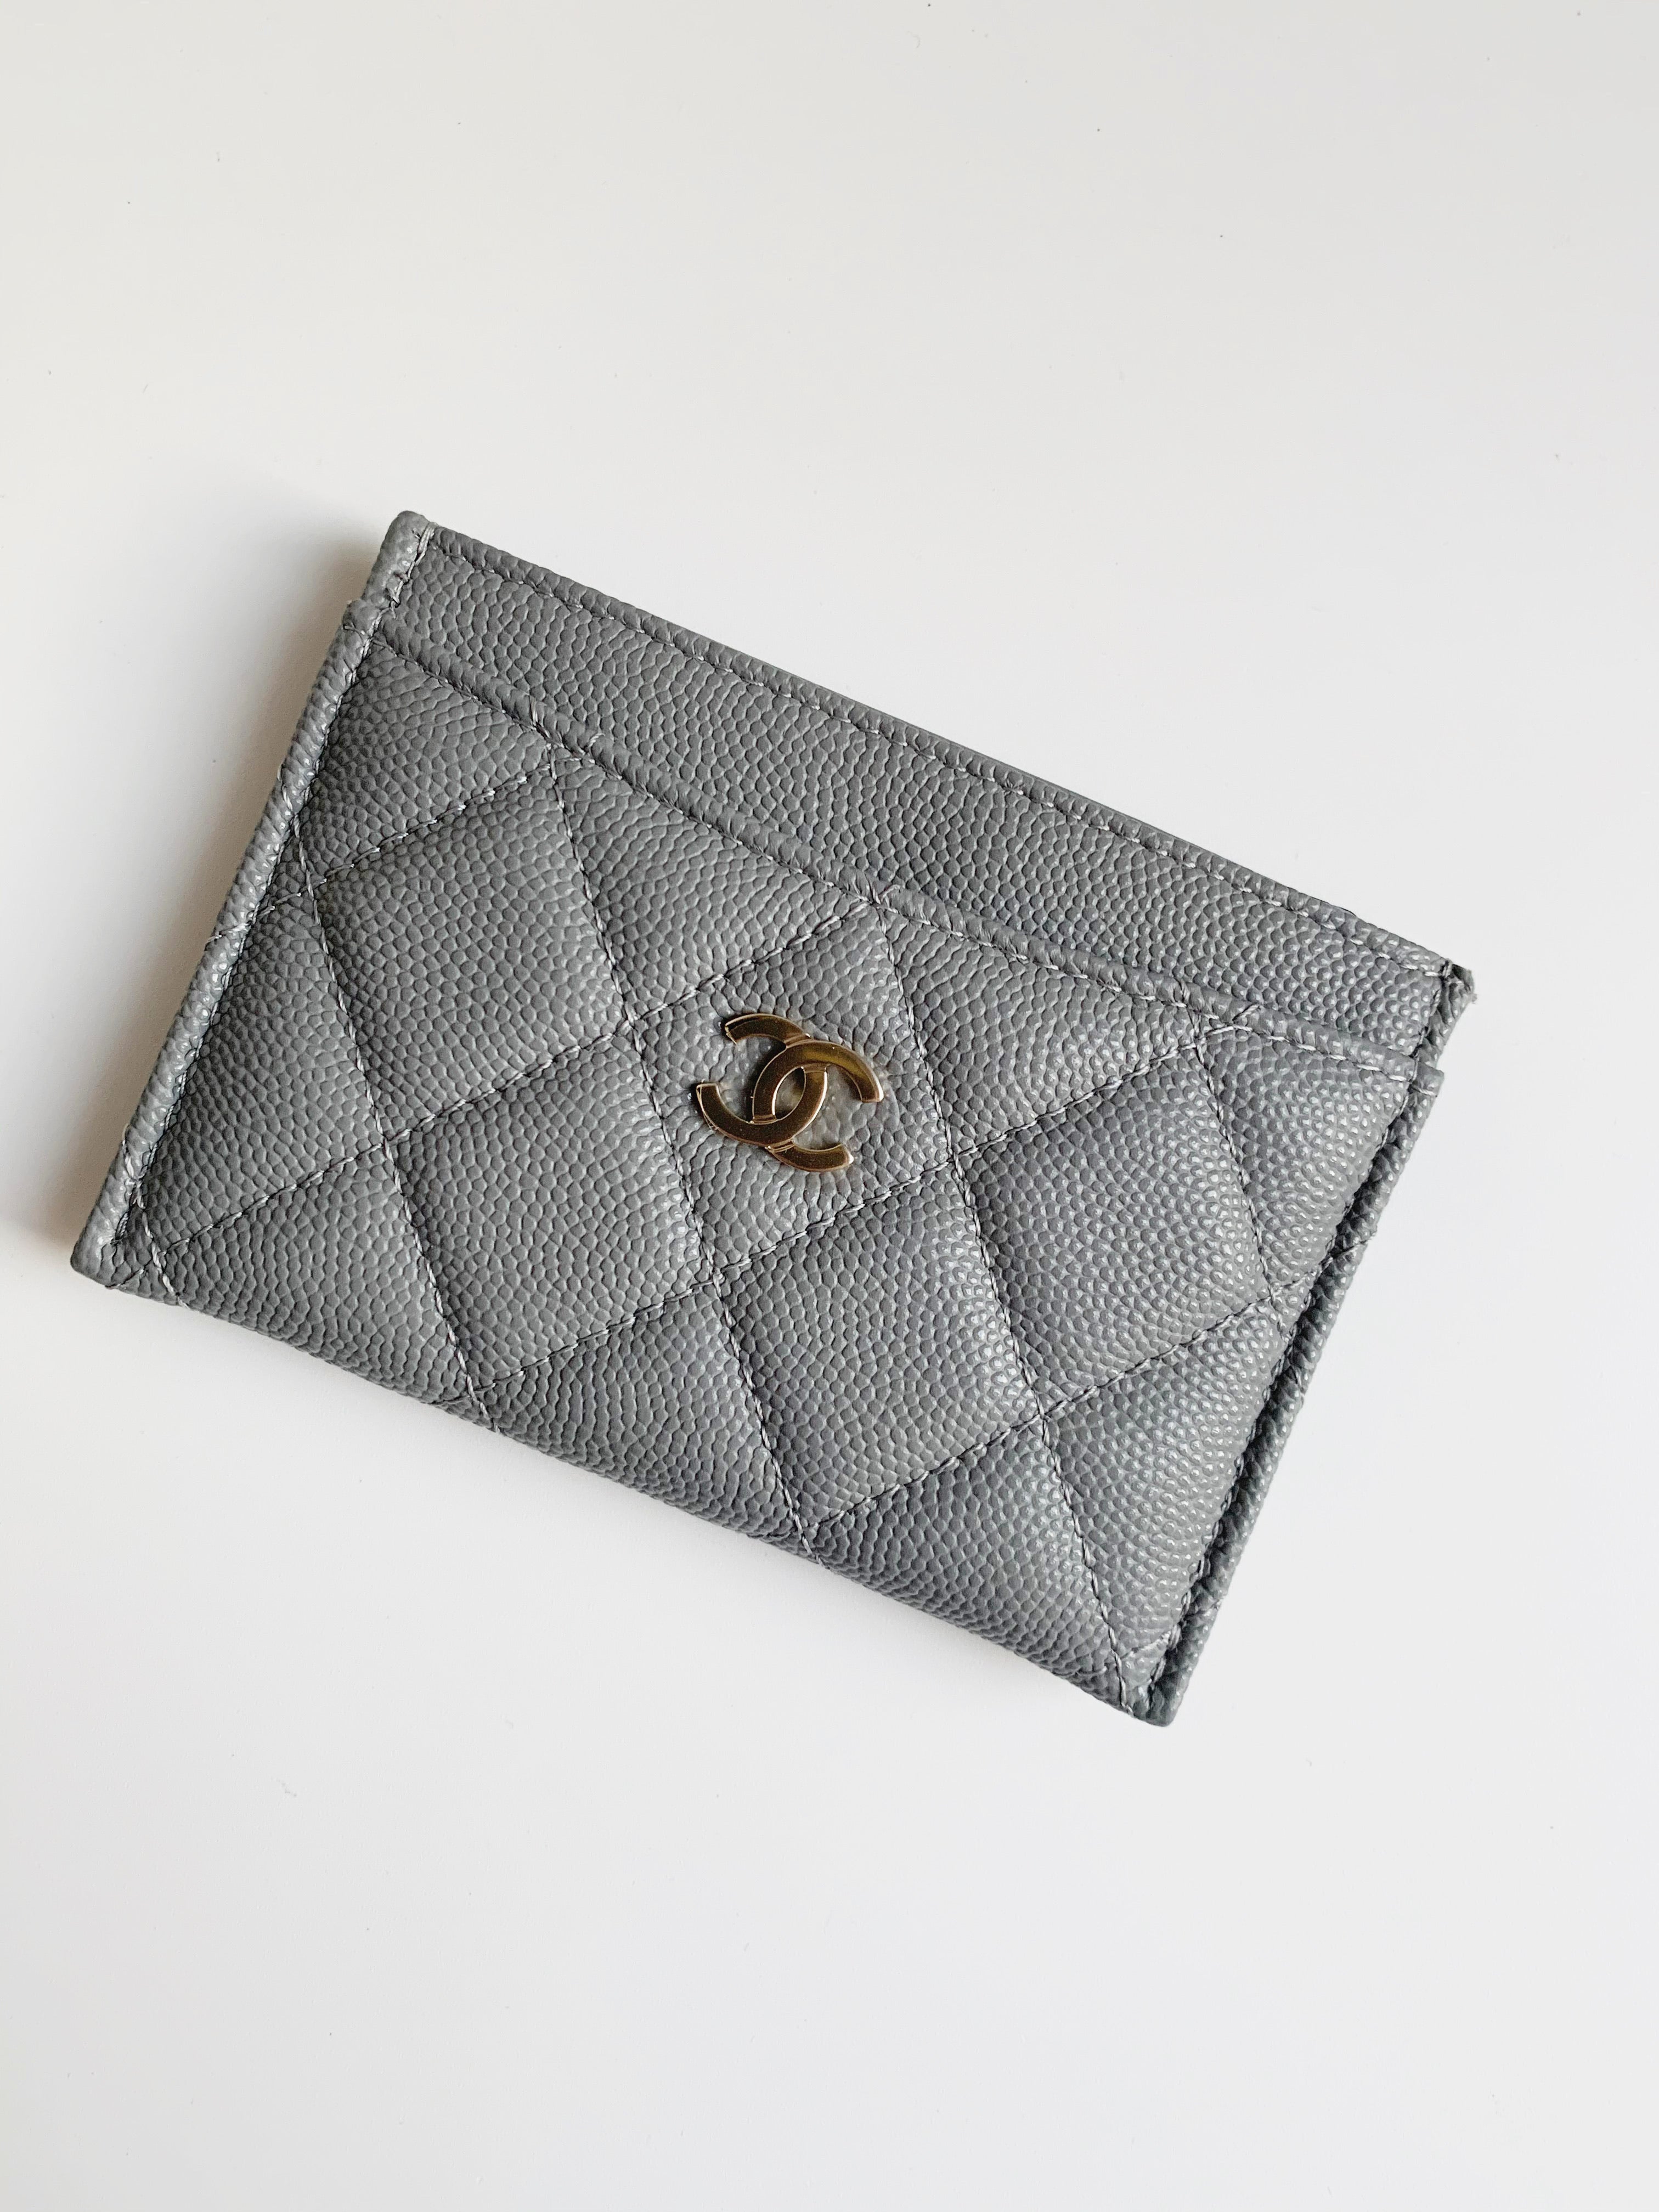 Chanel Light Green Quilted Caviar Leather CC O-Card Holder